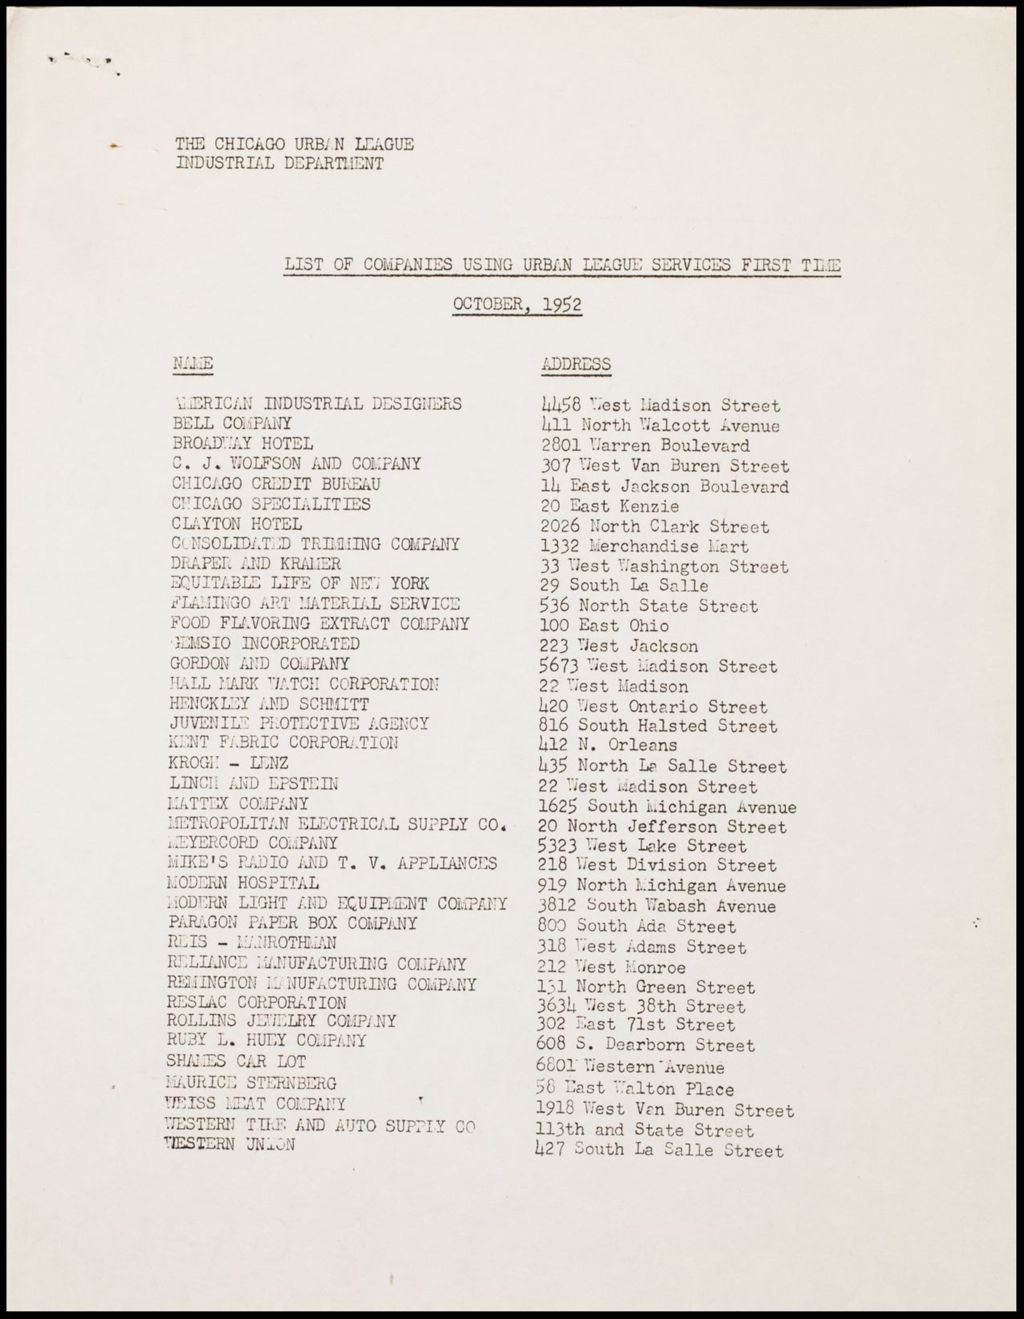 Miniature of Firms served for the first time, 1952-1953 (Folder I-2711)